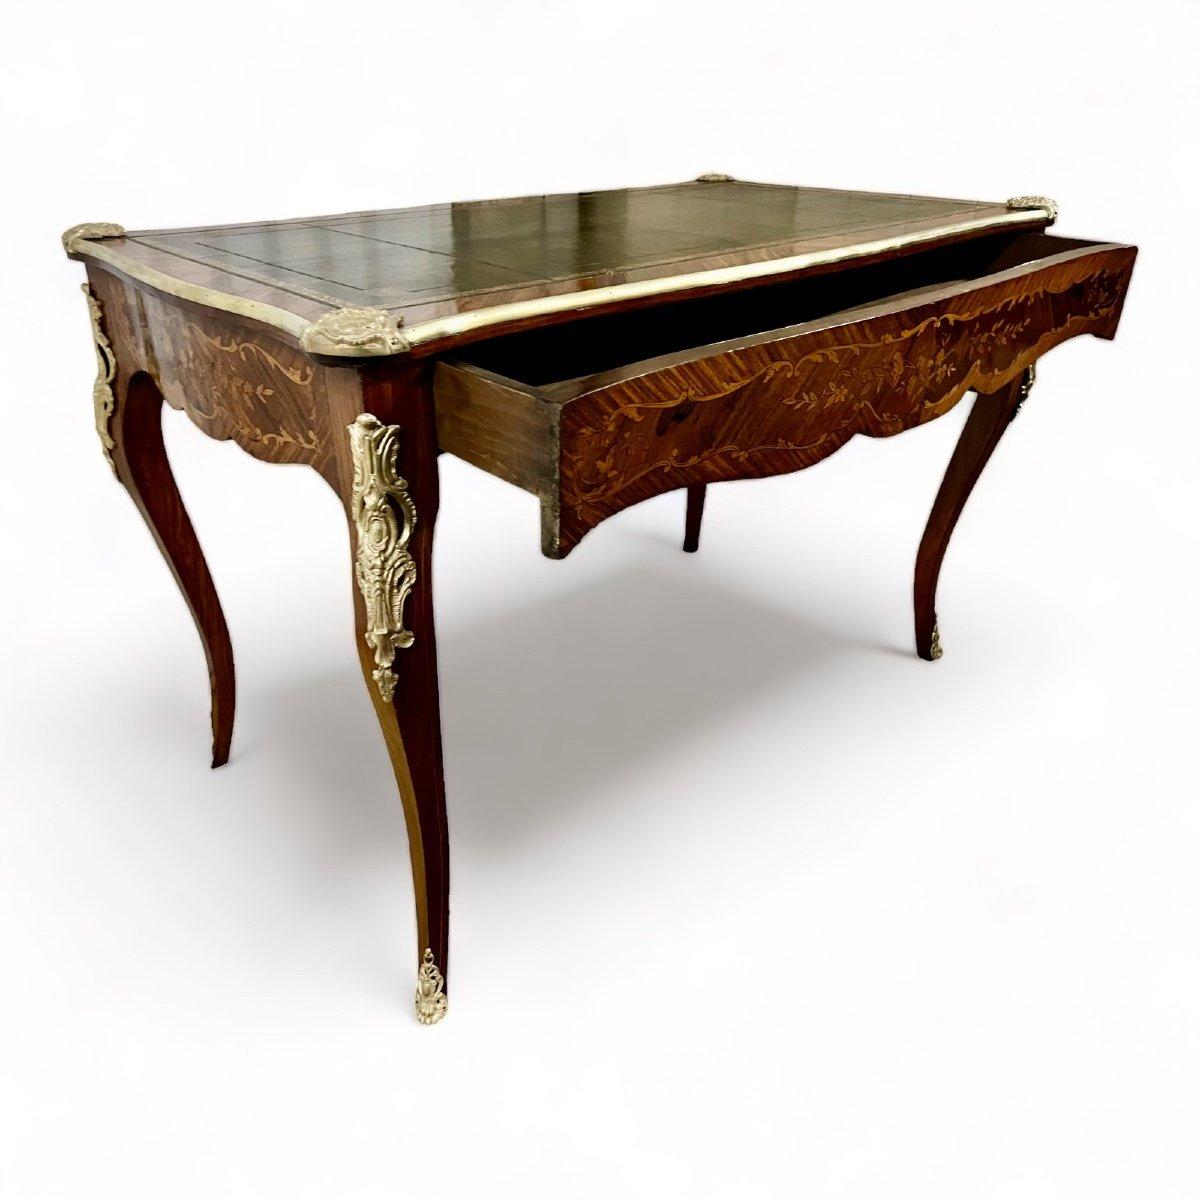 19th Century Louis XV-Style Marquetry Desk with Gilt Bronze Accents For Sale 2